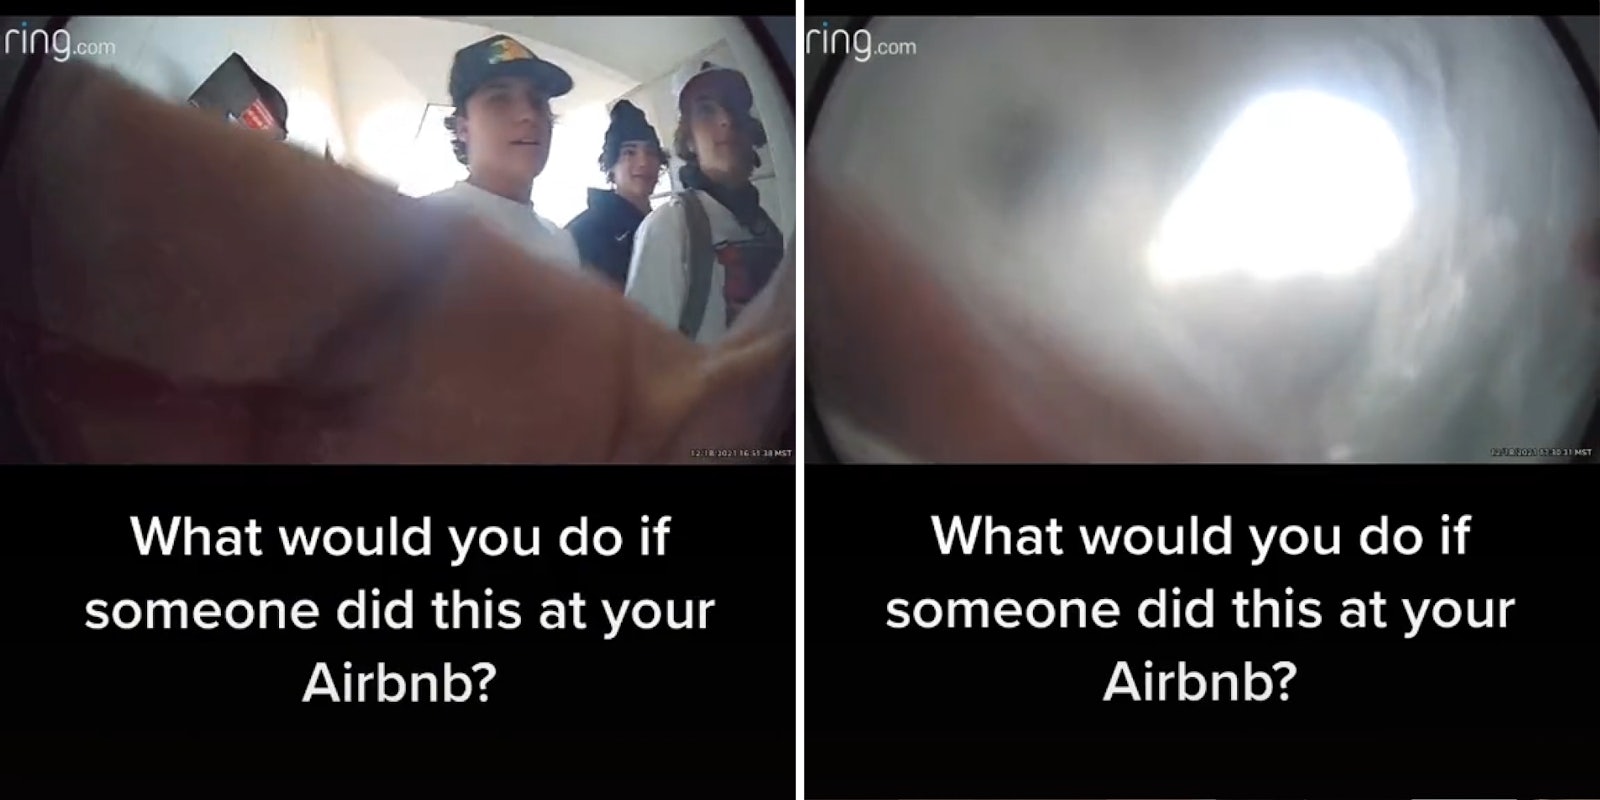 ring.com camera footage men walking in one hand on camera caption 'What would you do if someone did this at your Airbnb?' (l) ring.com camera footage plastic over camera lens caption 'What would you do if someone did this at your Airbnb?' (r)